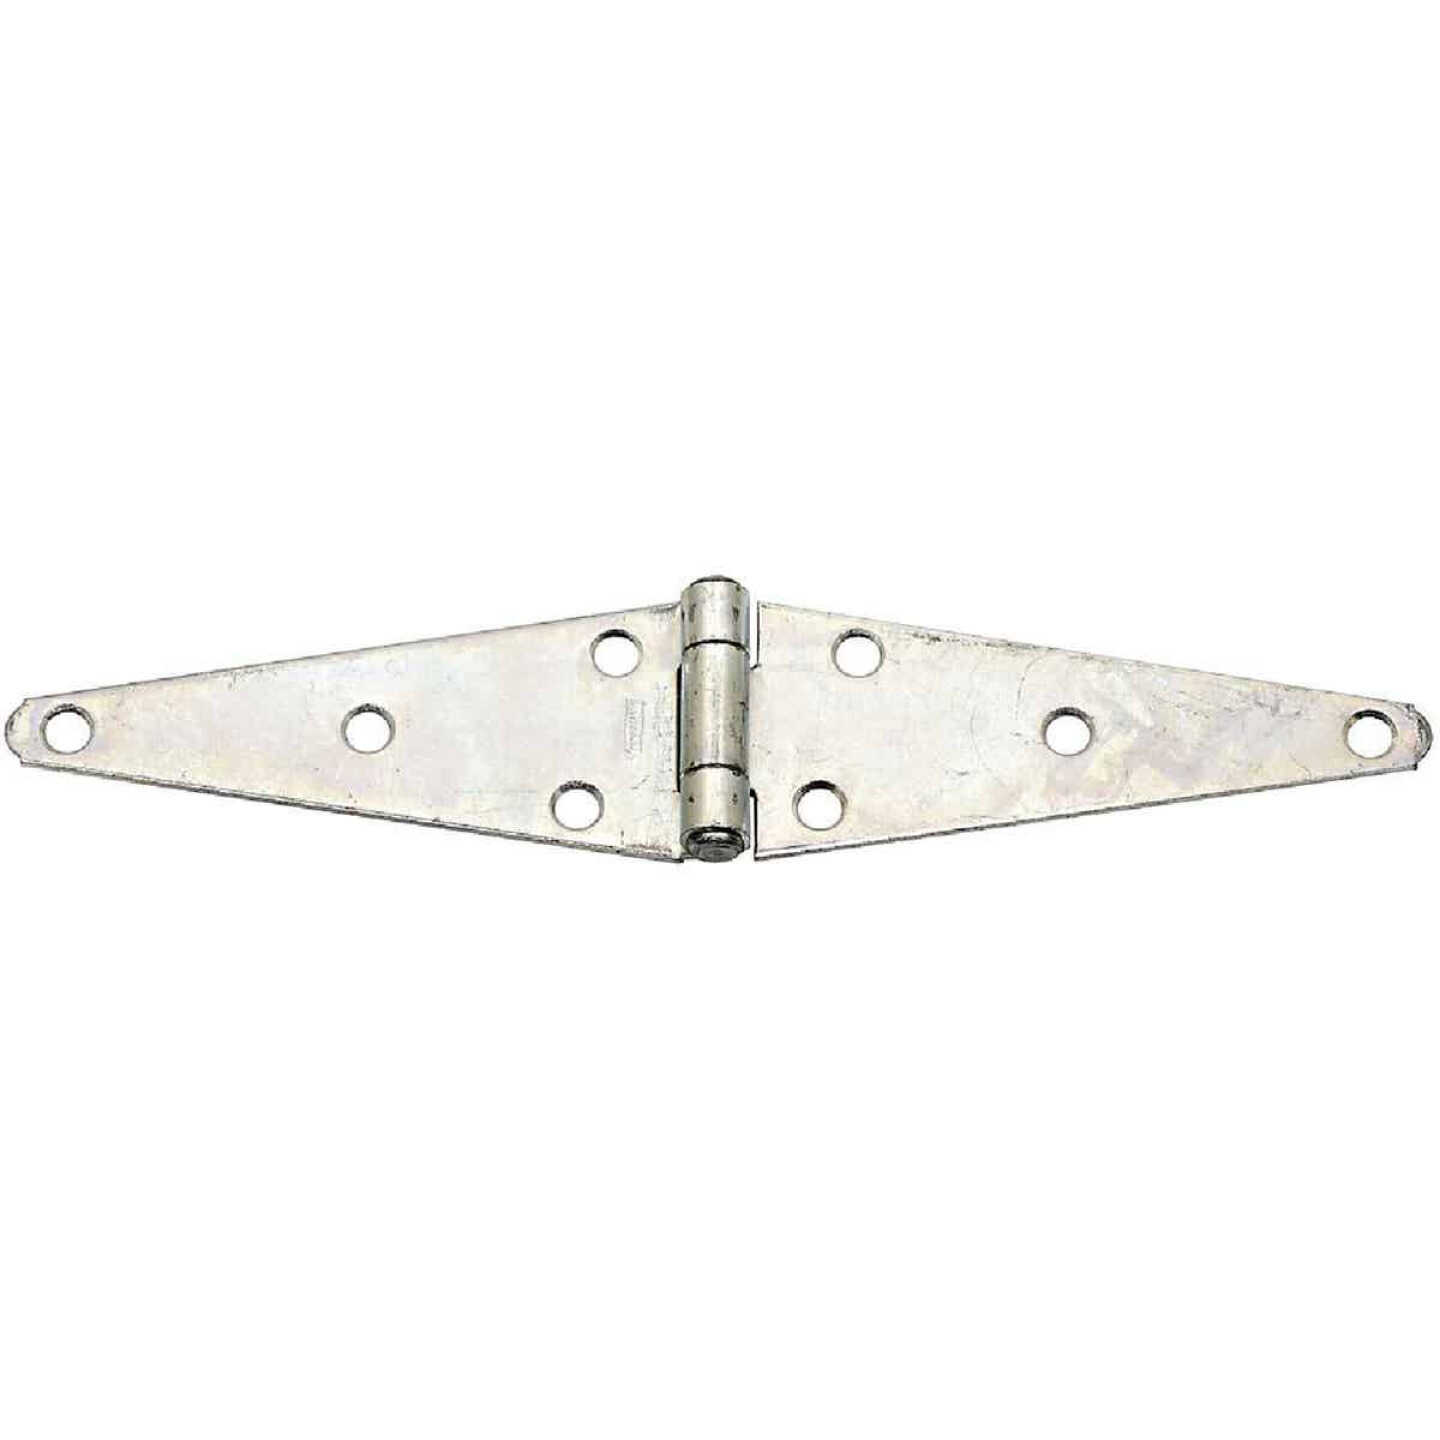 National 2.43 In. x 6 In. Zinc Heavy-Duty Strap Hinge (2-Pack) Image 1